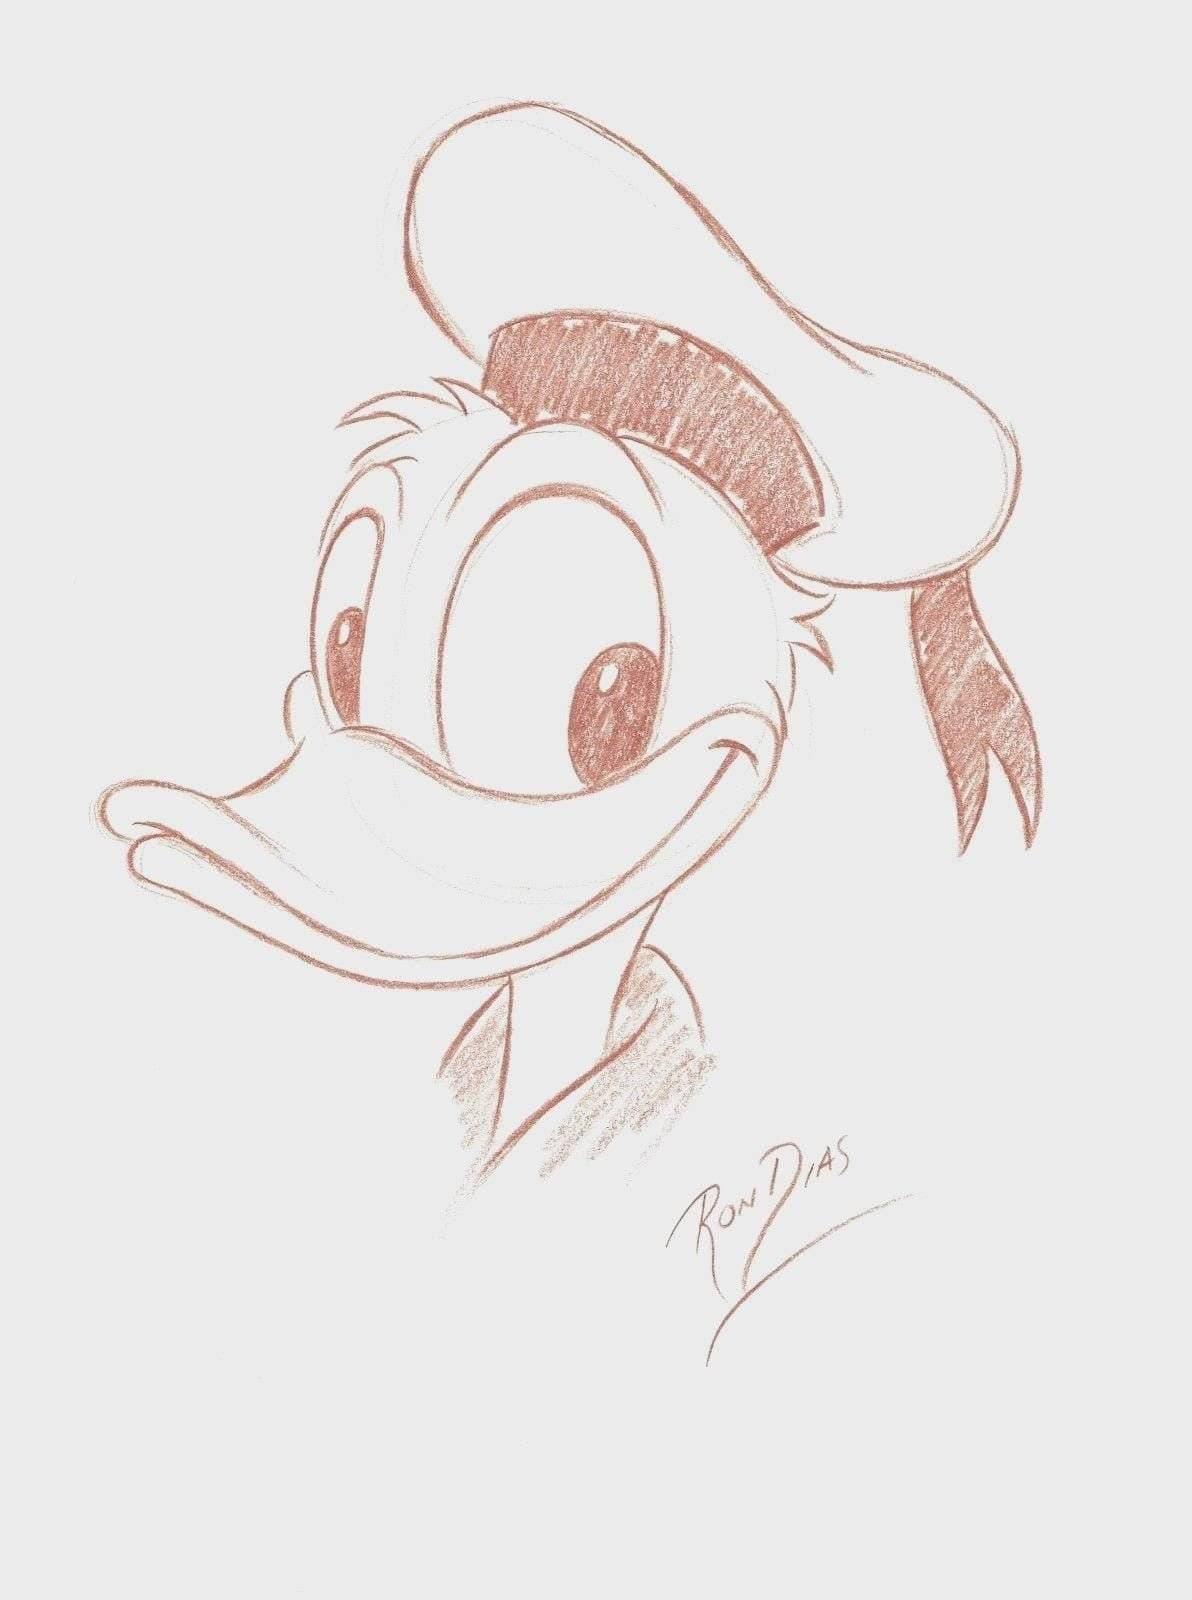 ron-dias-hand-drawing-signed-authentic-sketch-of-donald-duck-disney-mickey-mouse-inscriptagraphs-memorabilia-1